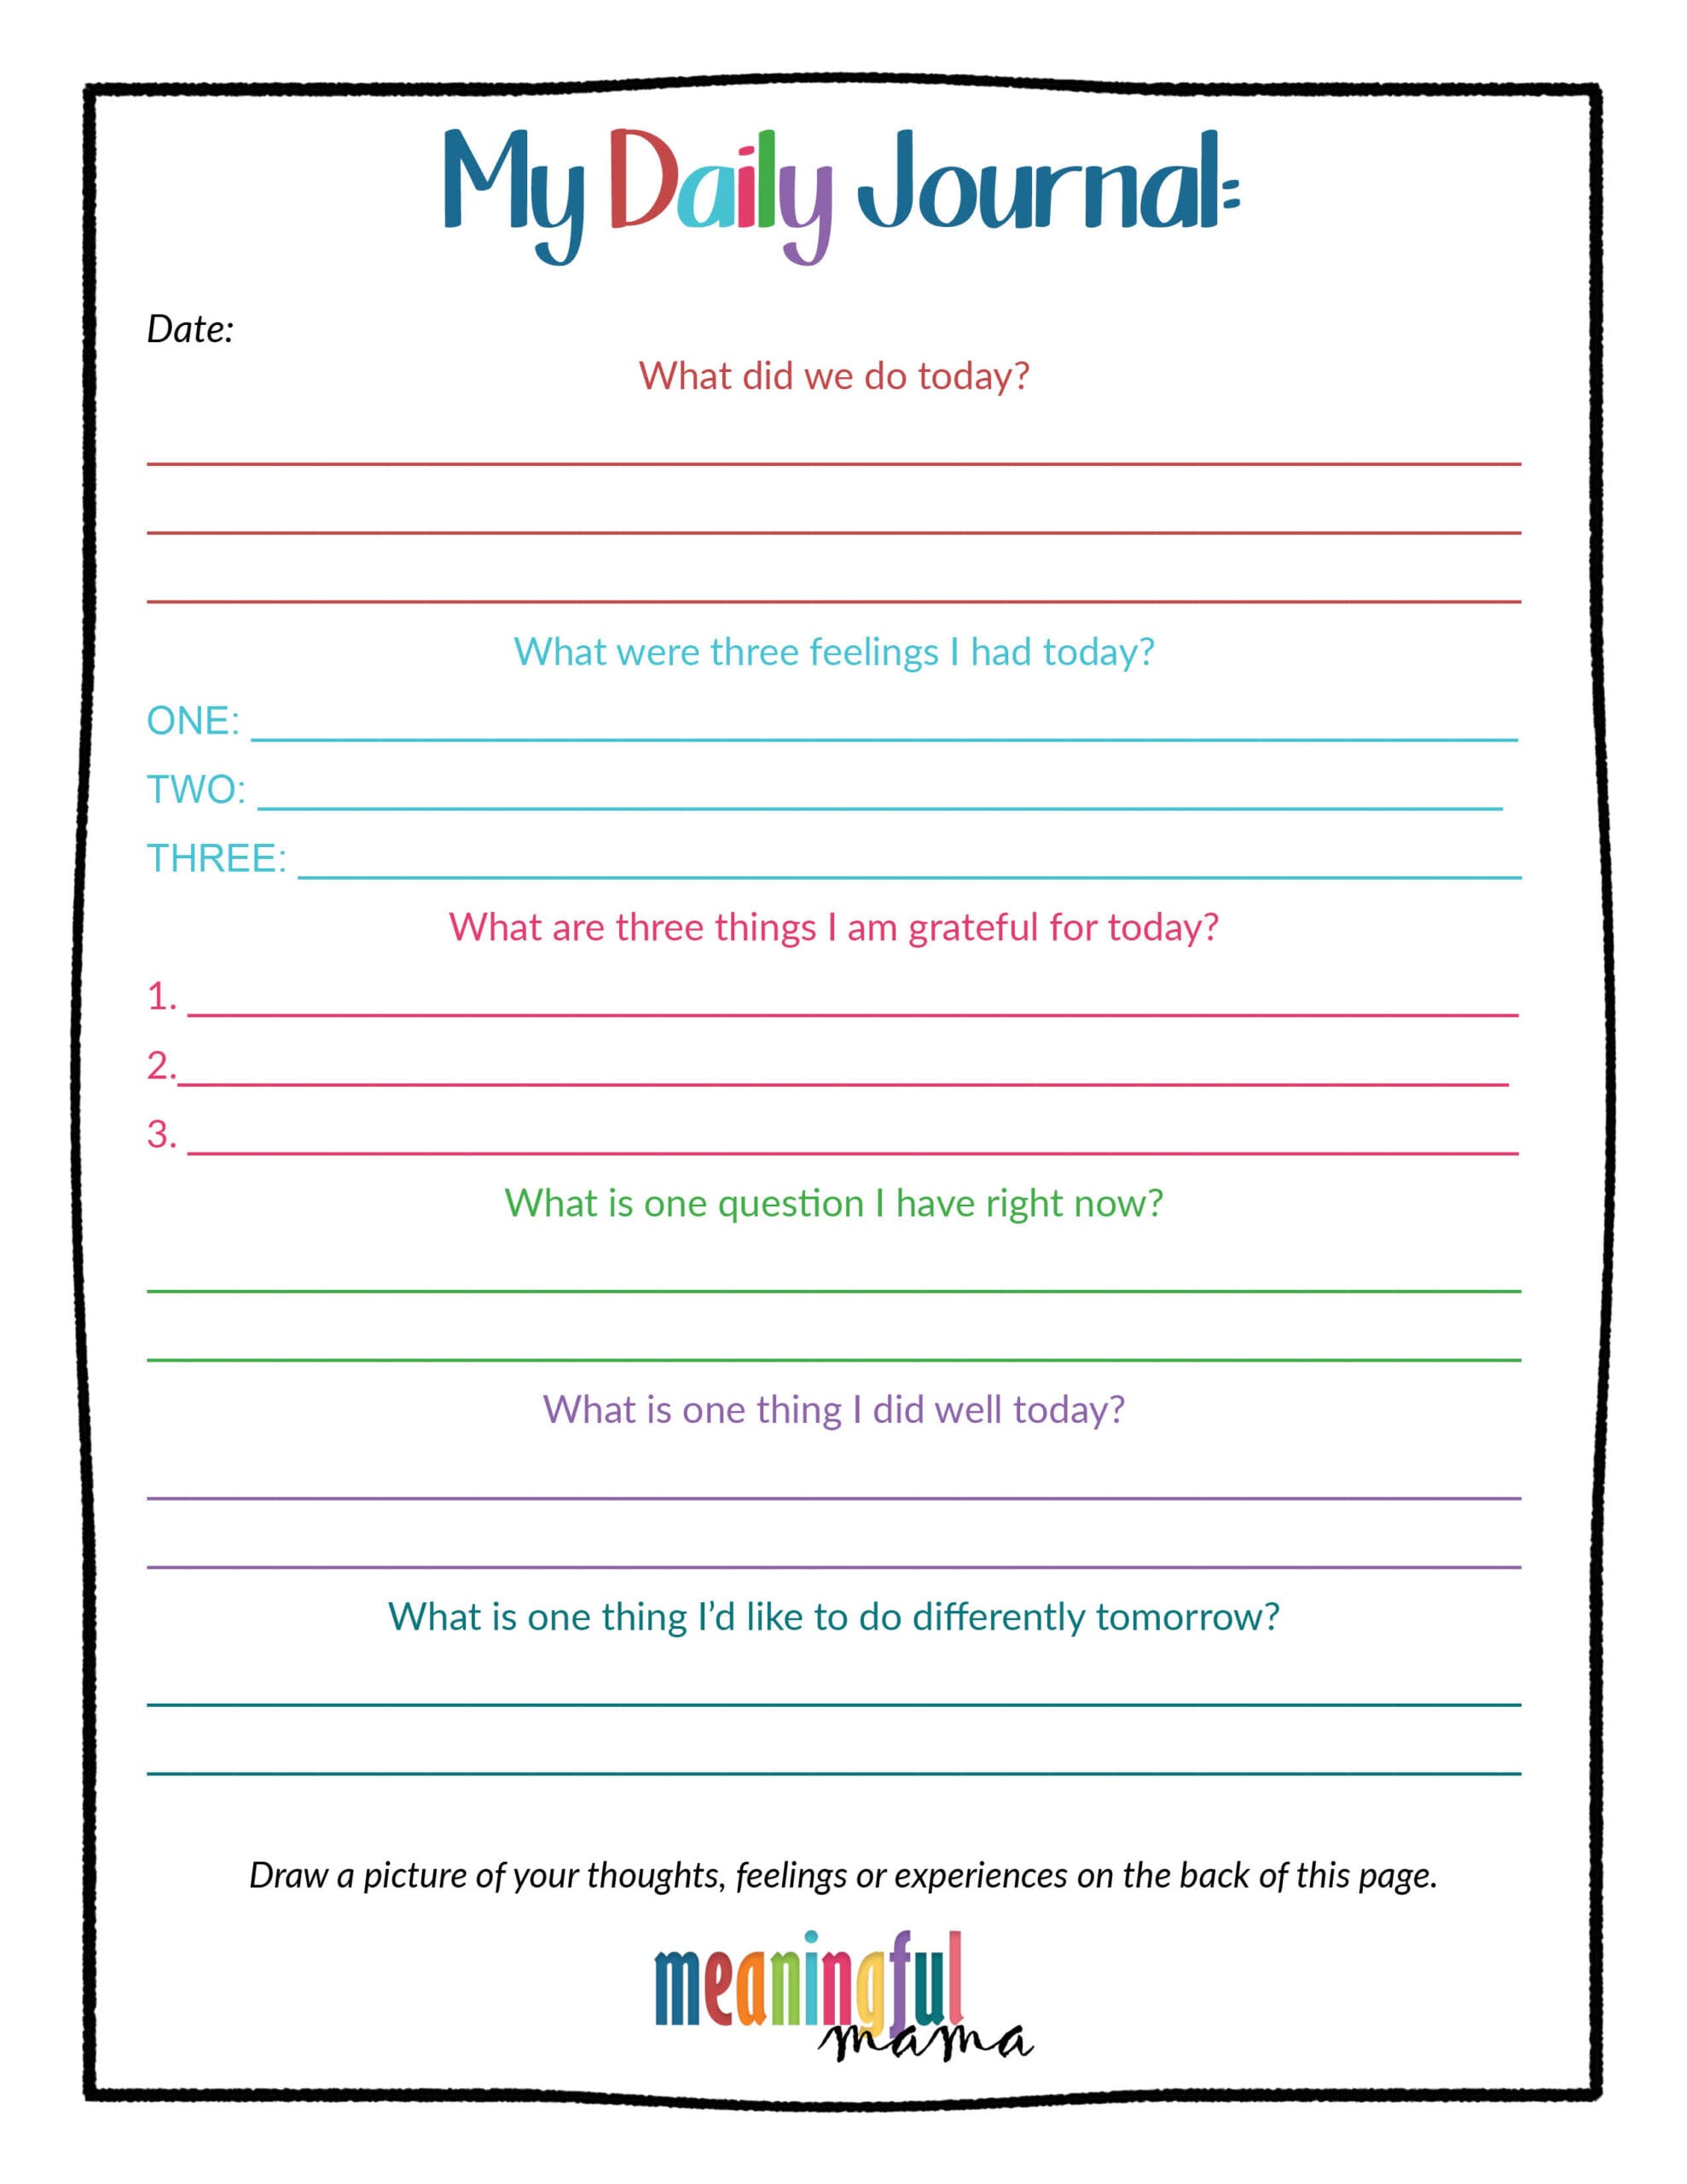 Daily Journal Template from meaningfulmama.com